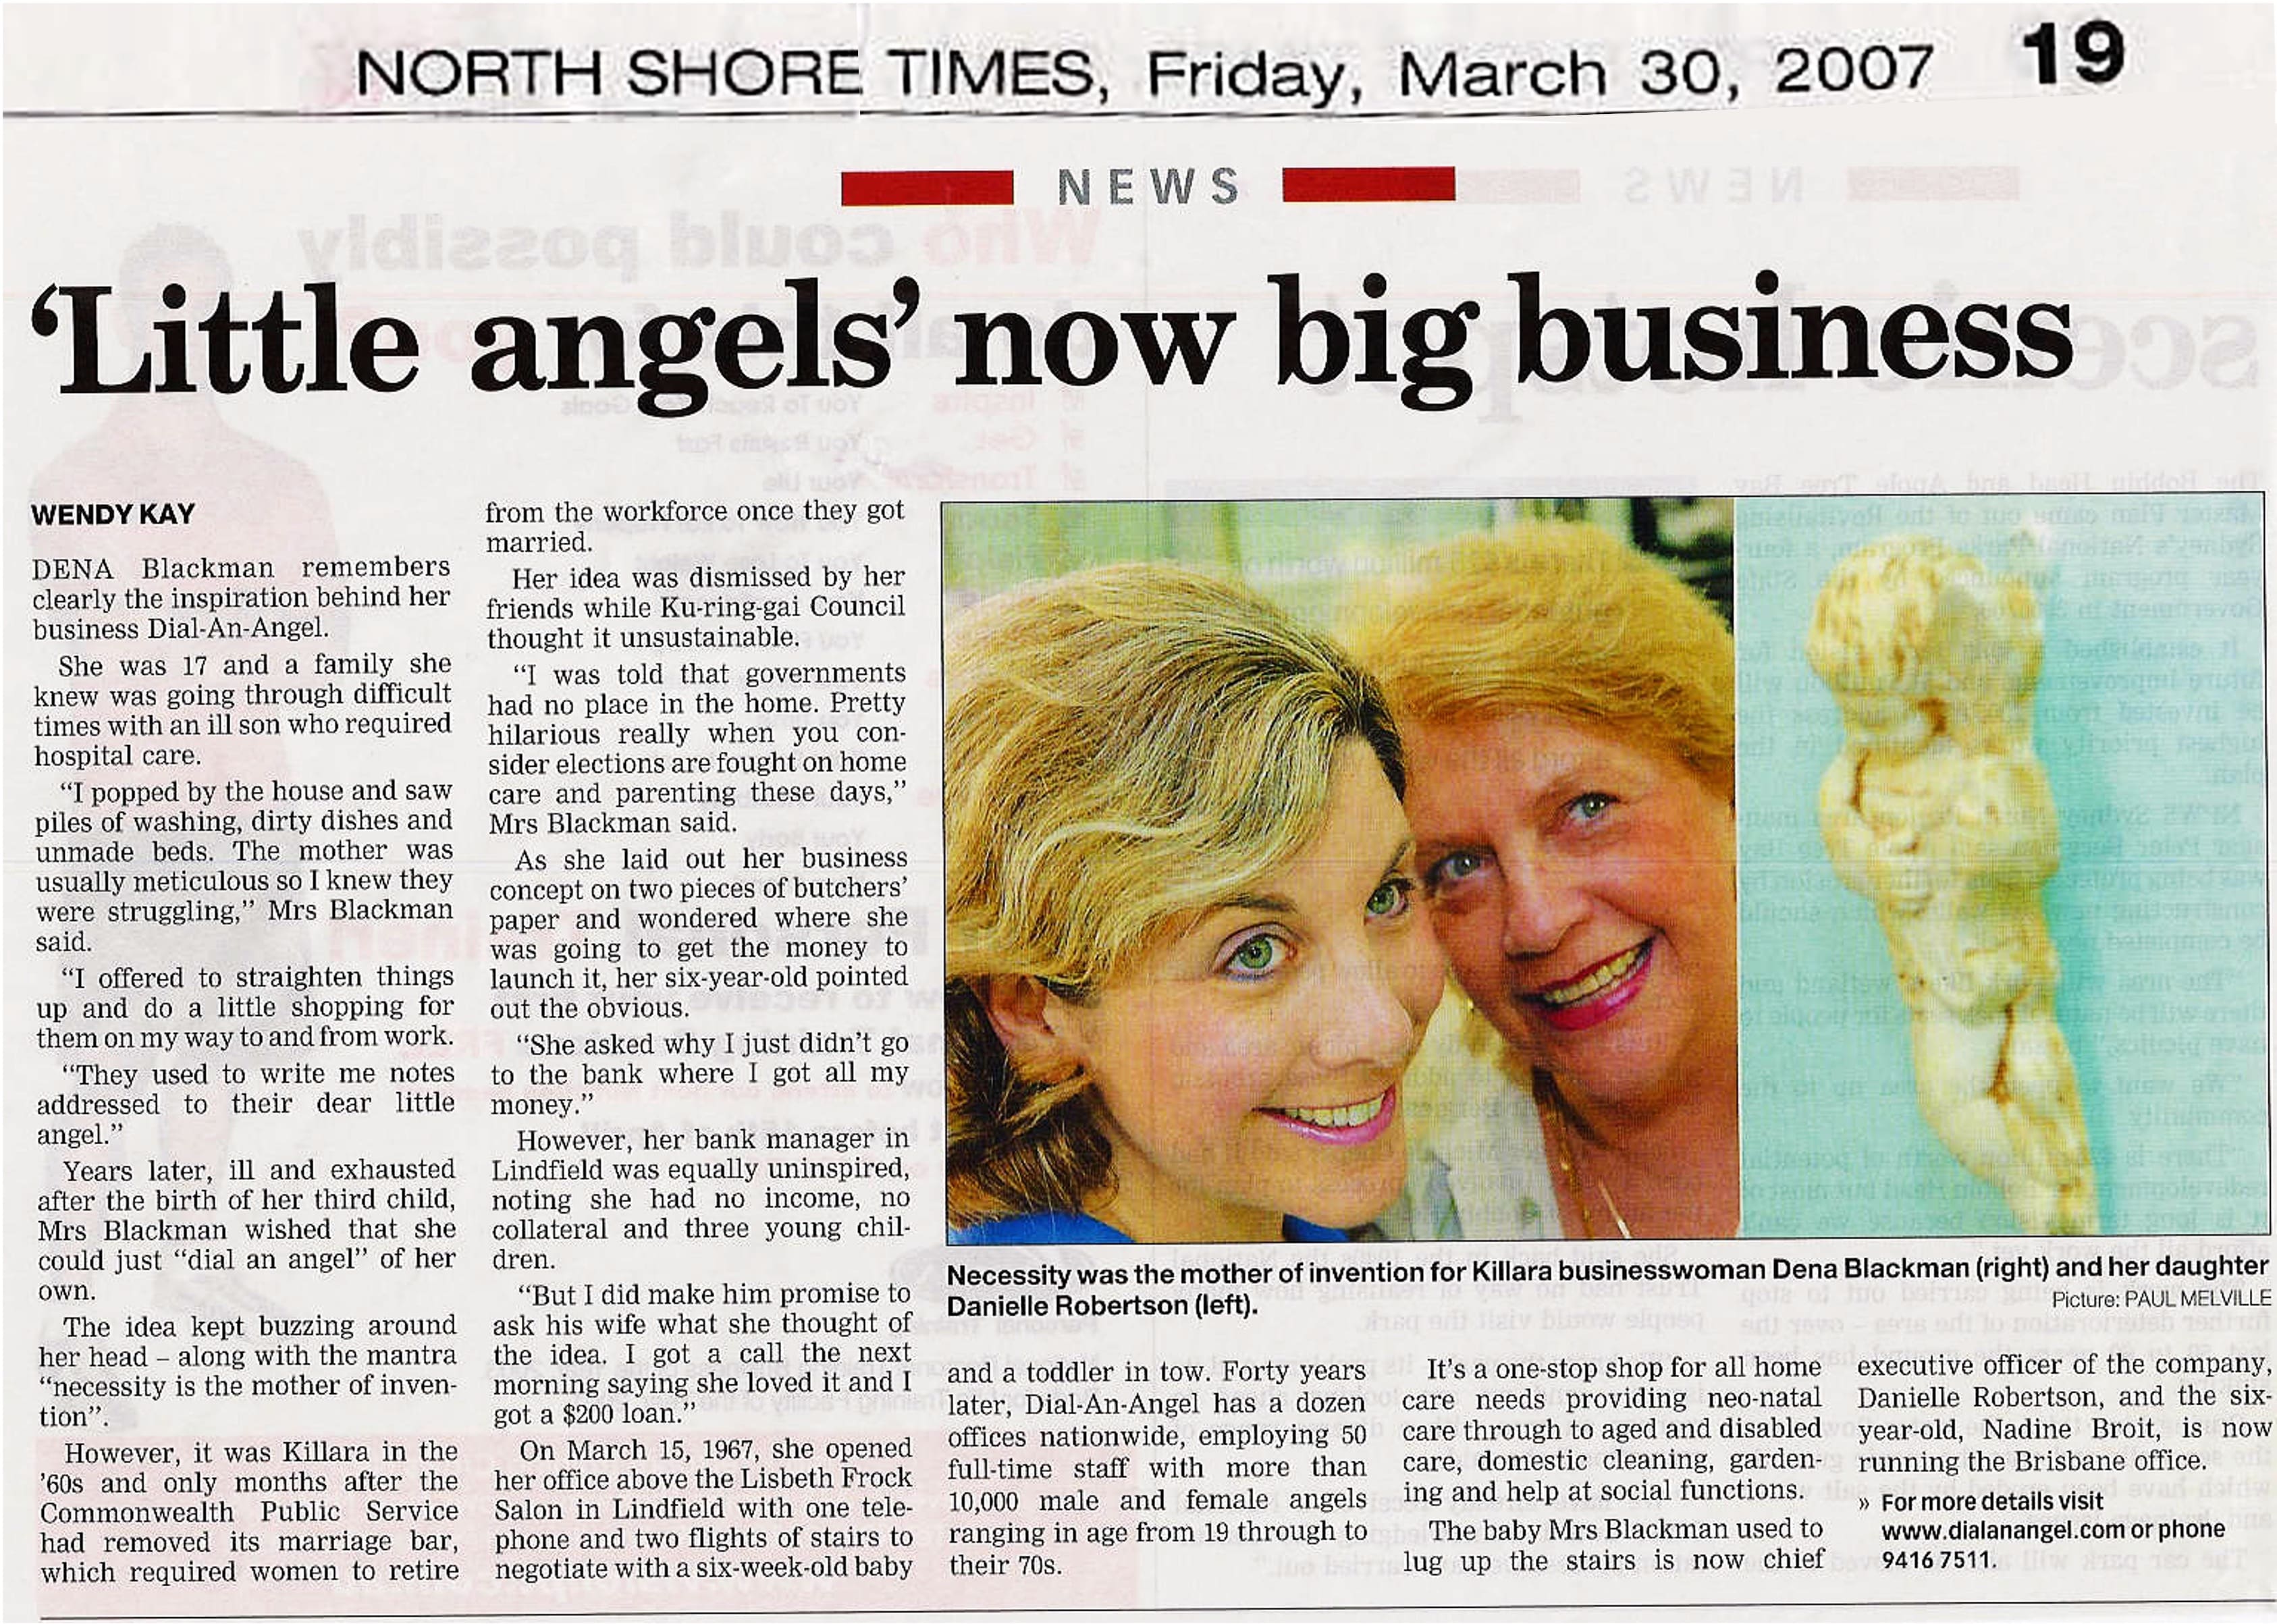 DIAL-AN-ANGEL in the North Shore Times Article 2007